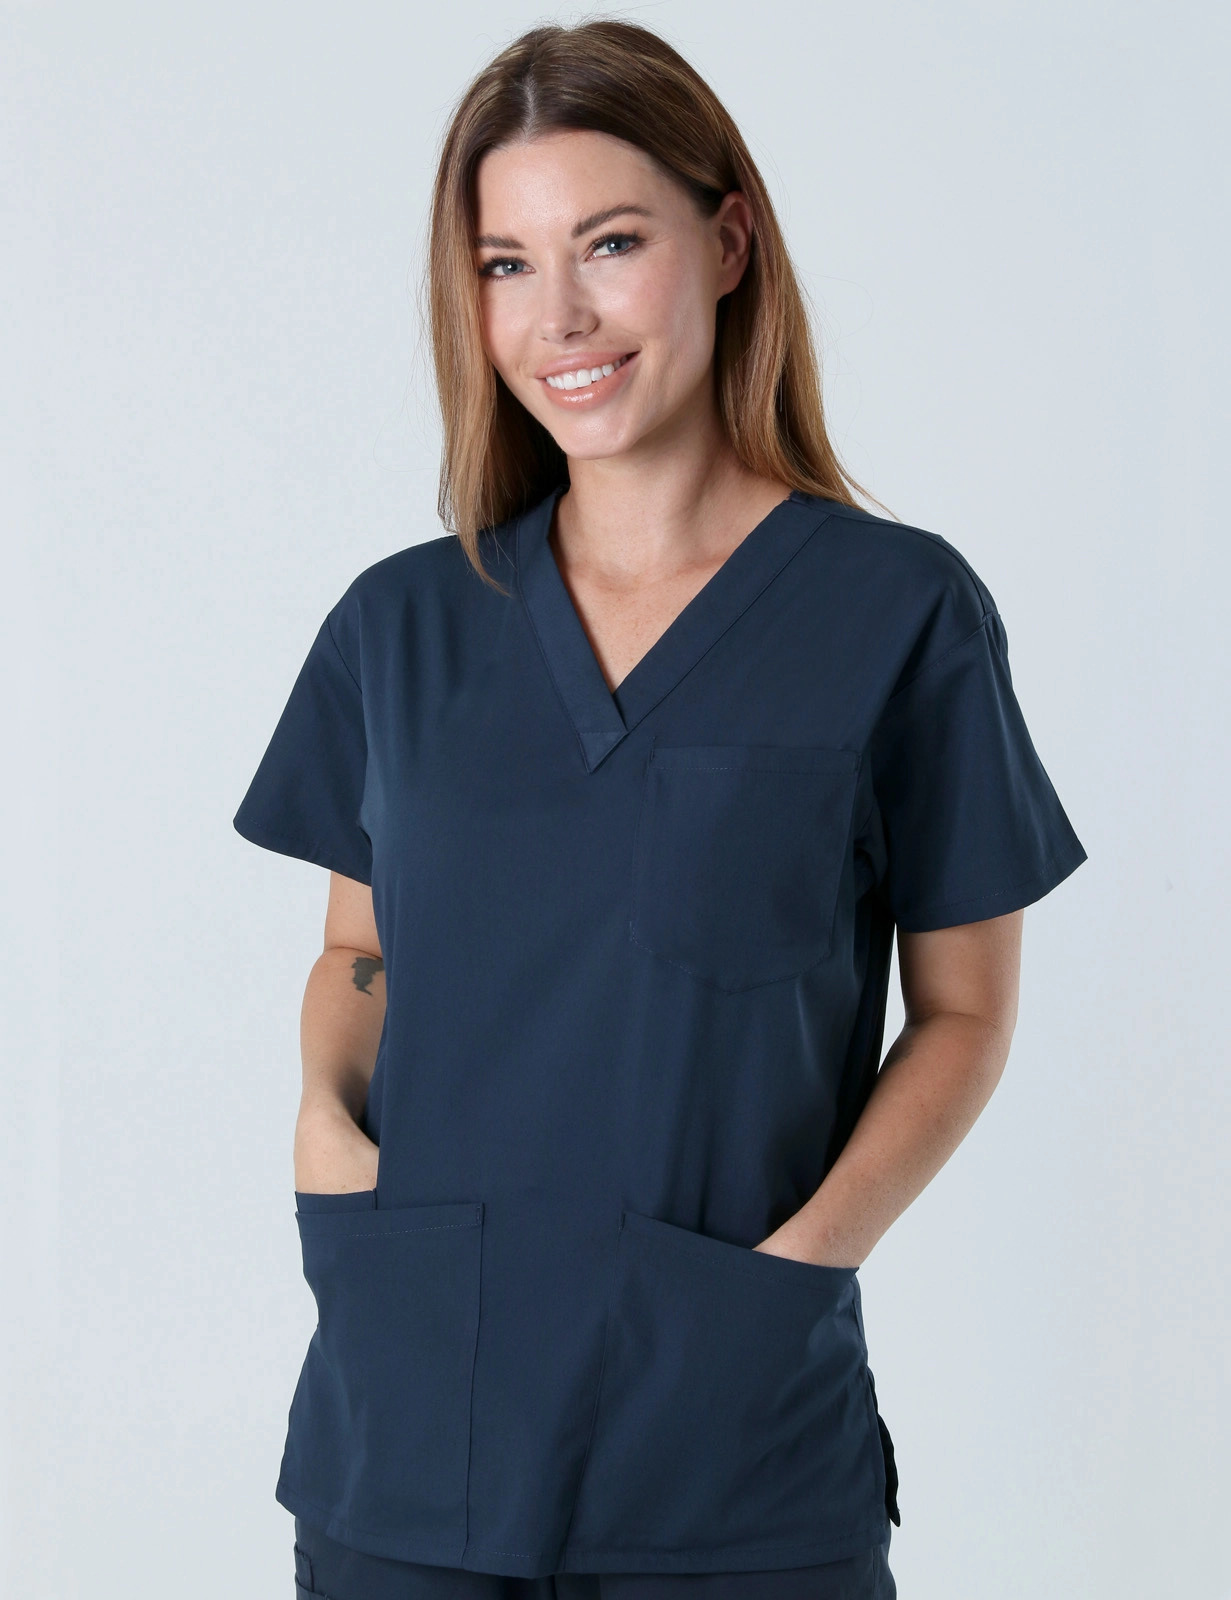 VVED - Women's 4 Pocket Scrub Top and Cargo Pants in Navy (Incl Logo)